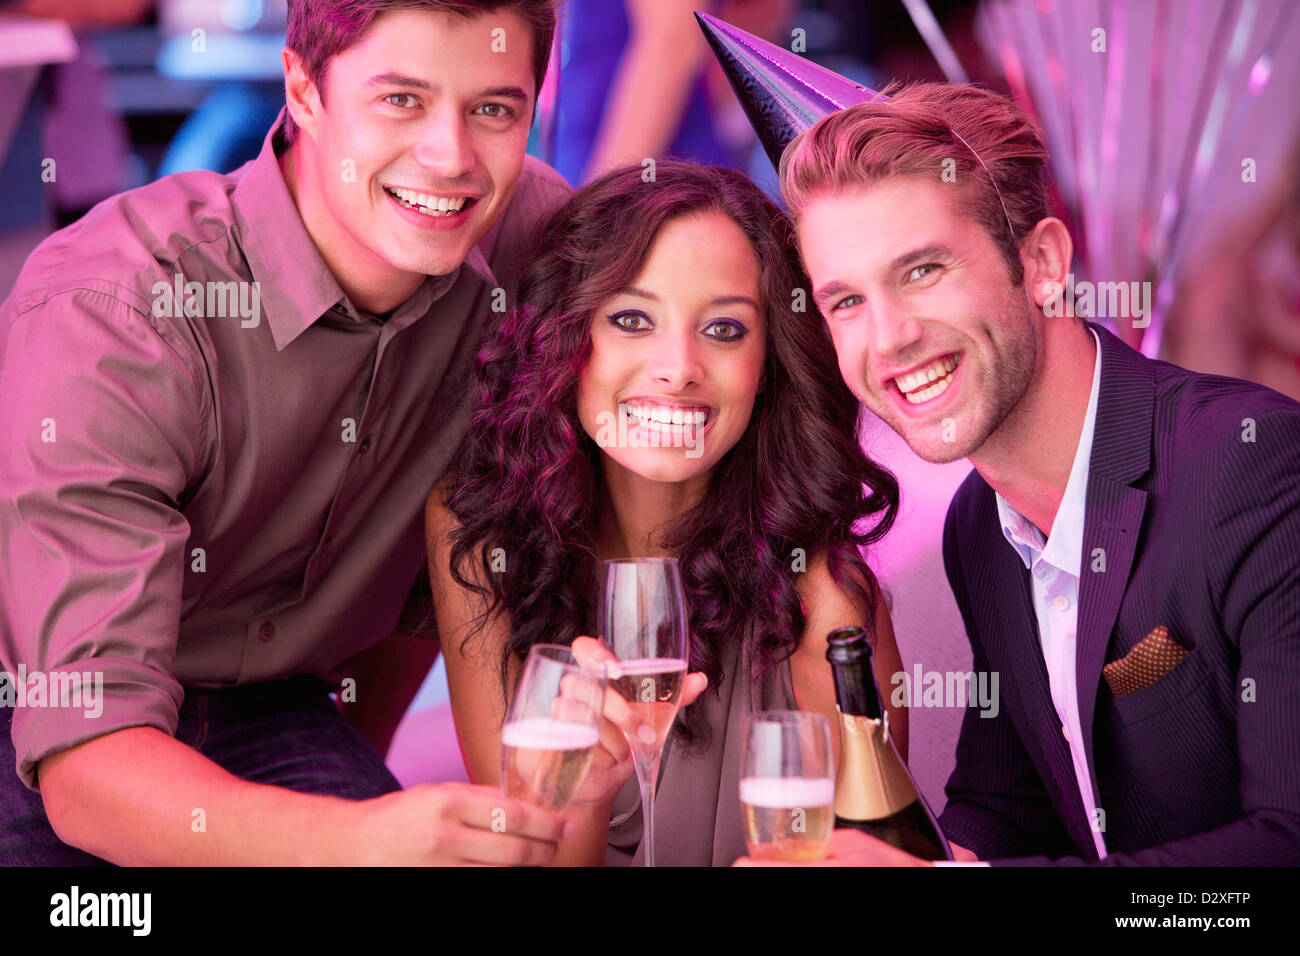 Portrait of smiling friends drinking champagne in nightclub Banque D'Images